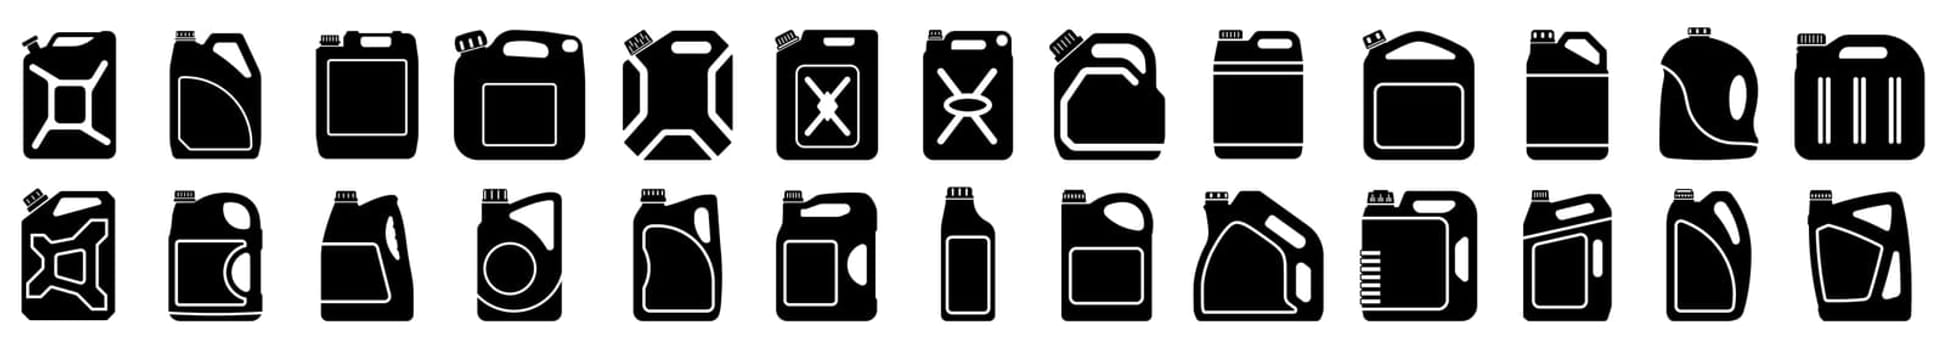 Canister icons set. Fuel tank icon. Black canister icons.